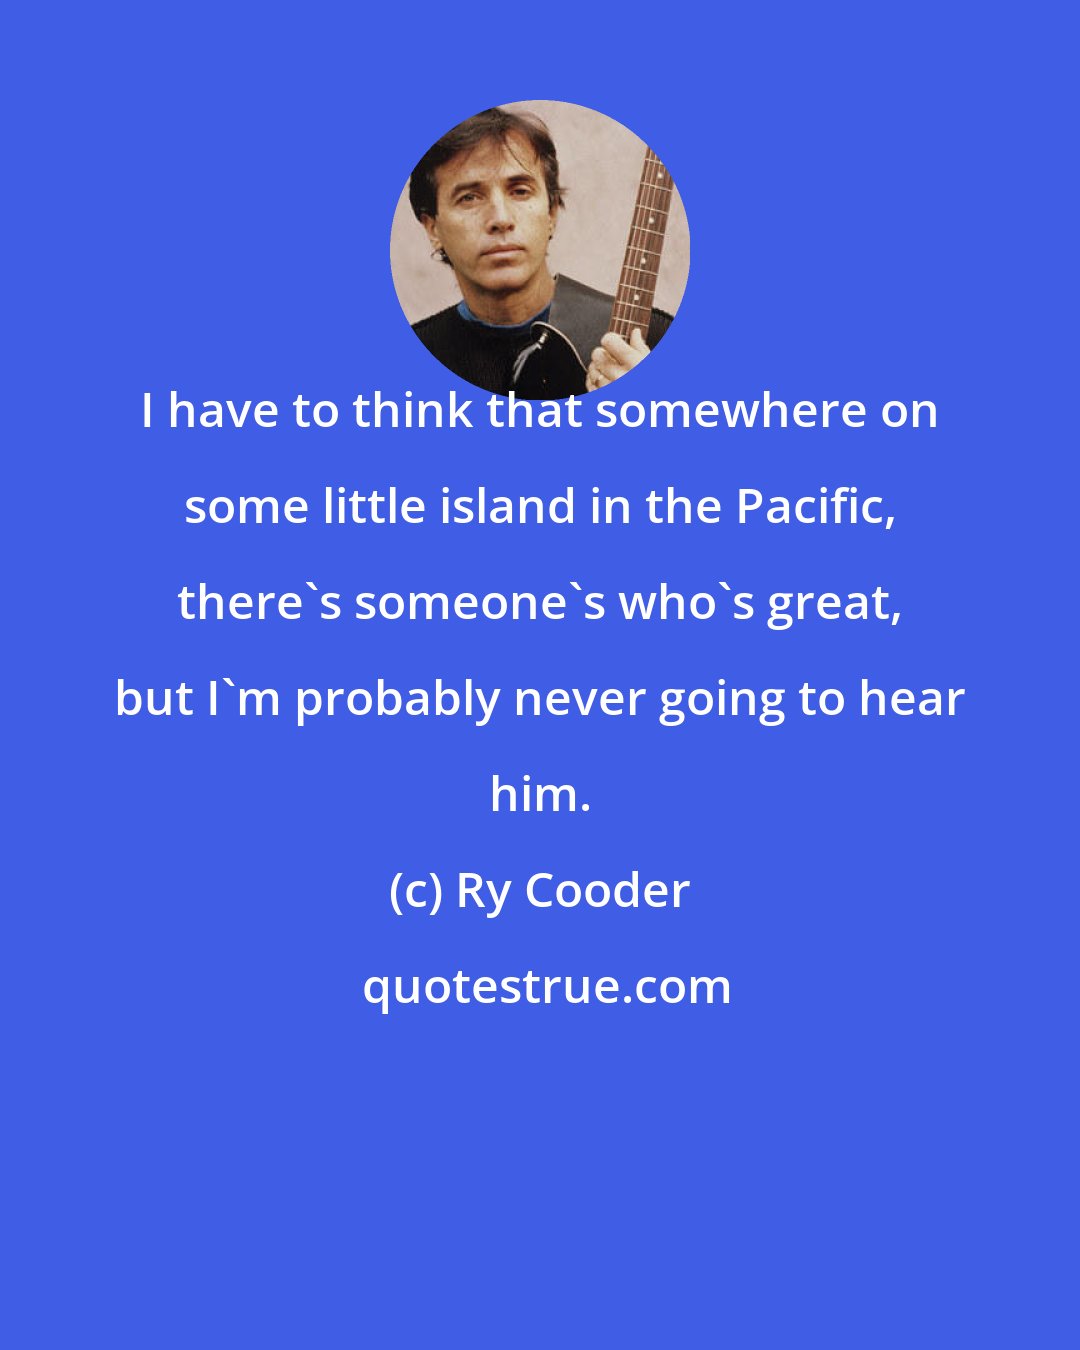 Ry Cooder: I have to think that somewhere on some little island in the Pacific, there's someone's who's great, but I'm probably never going to hear him.